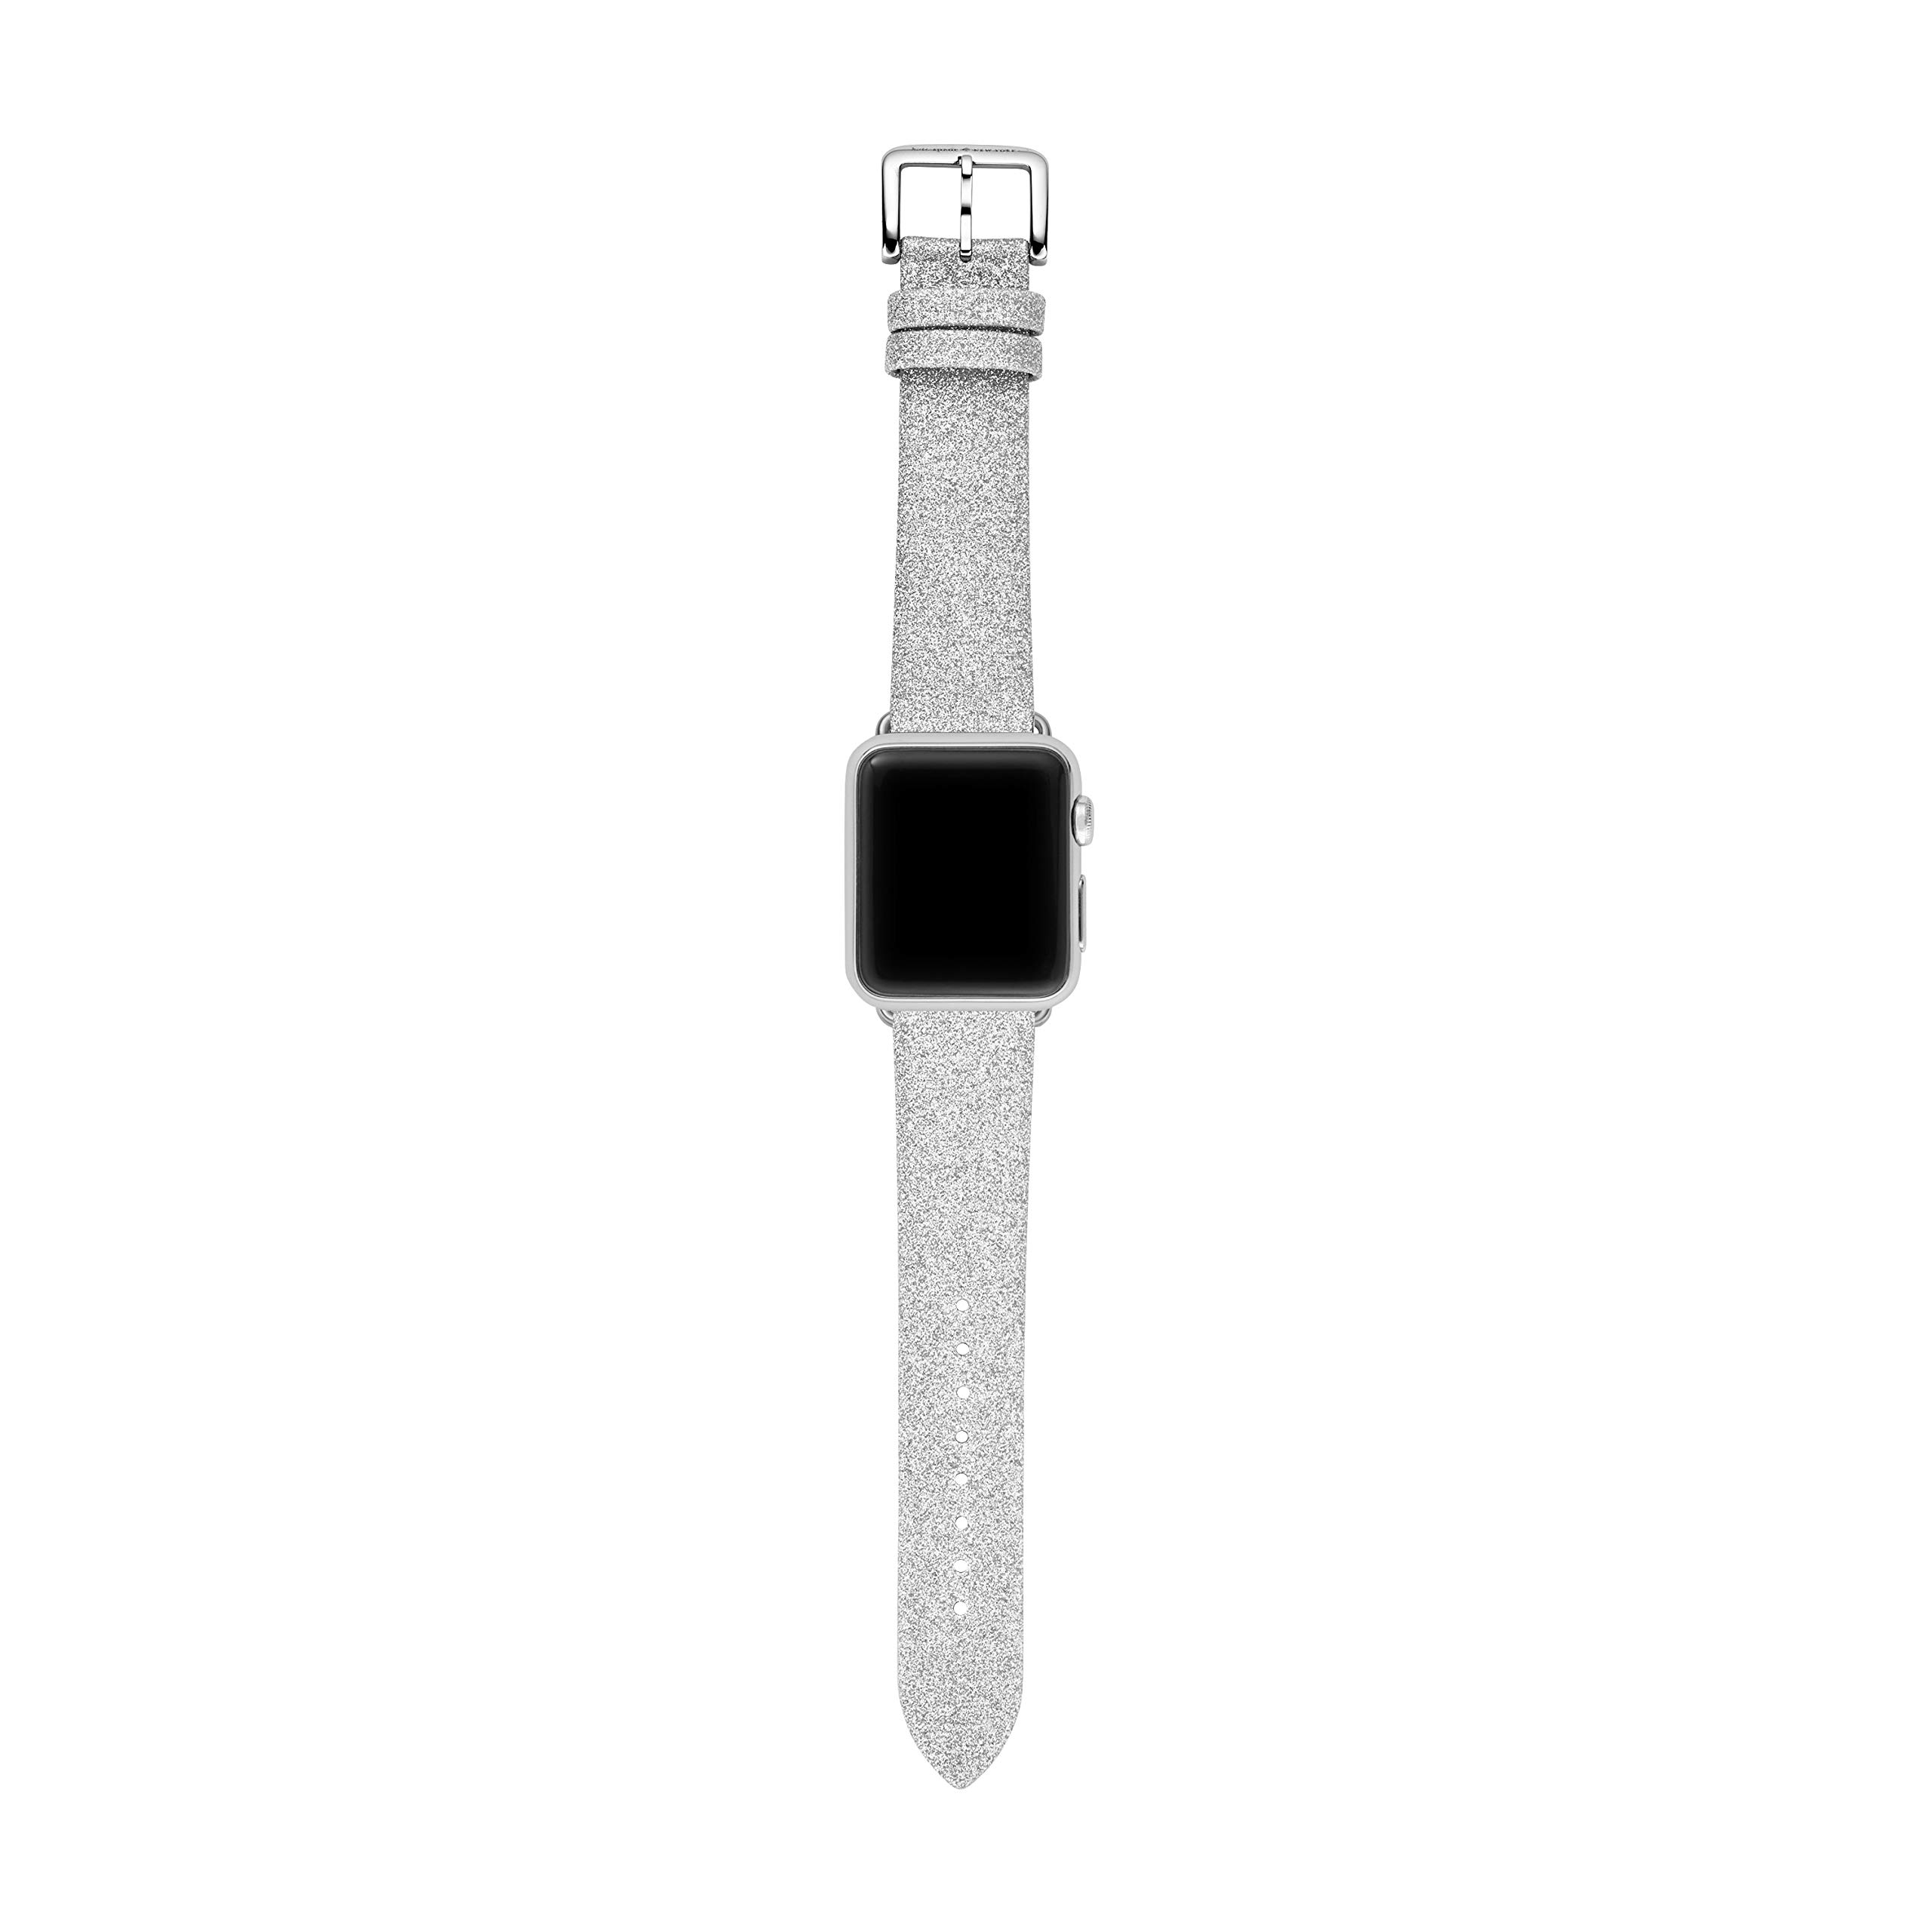 Kate Spade New York KSS0020 38mm Apple Straps Genuine Leather Silver Watch Strap